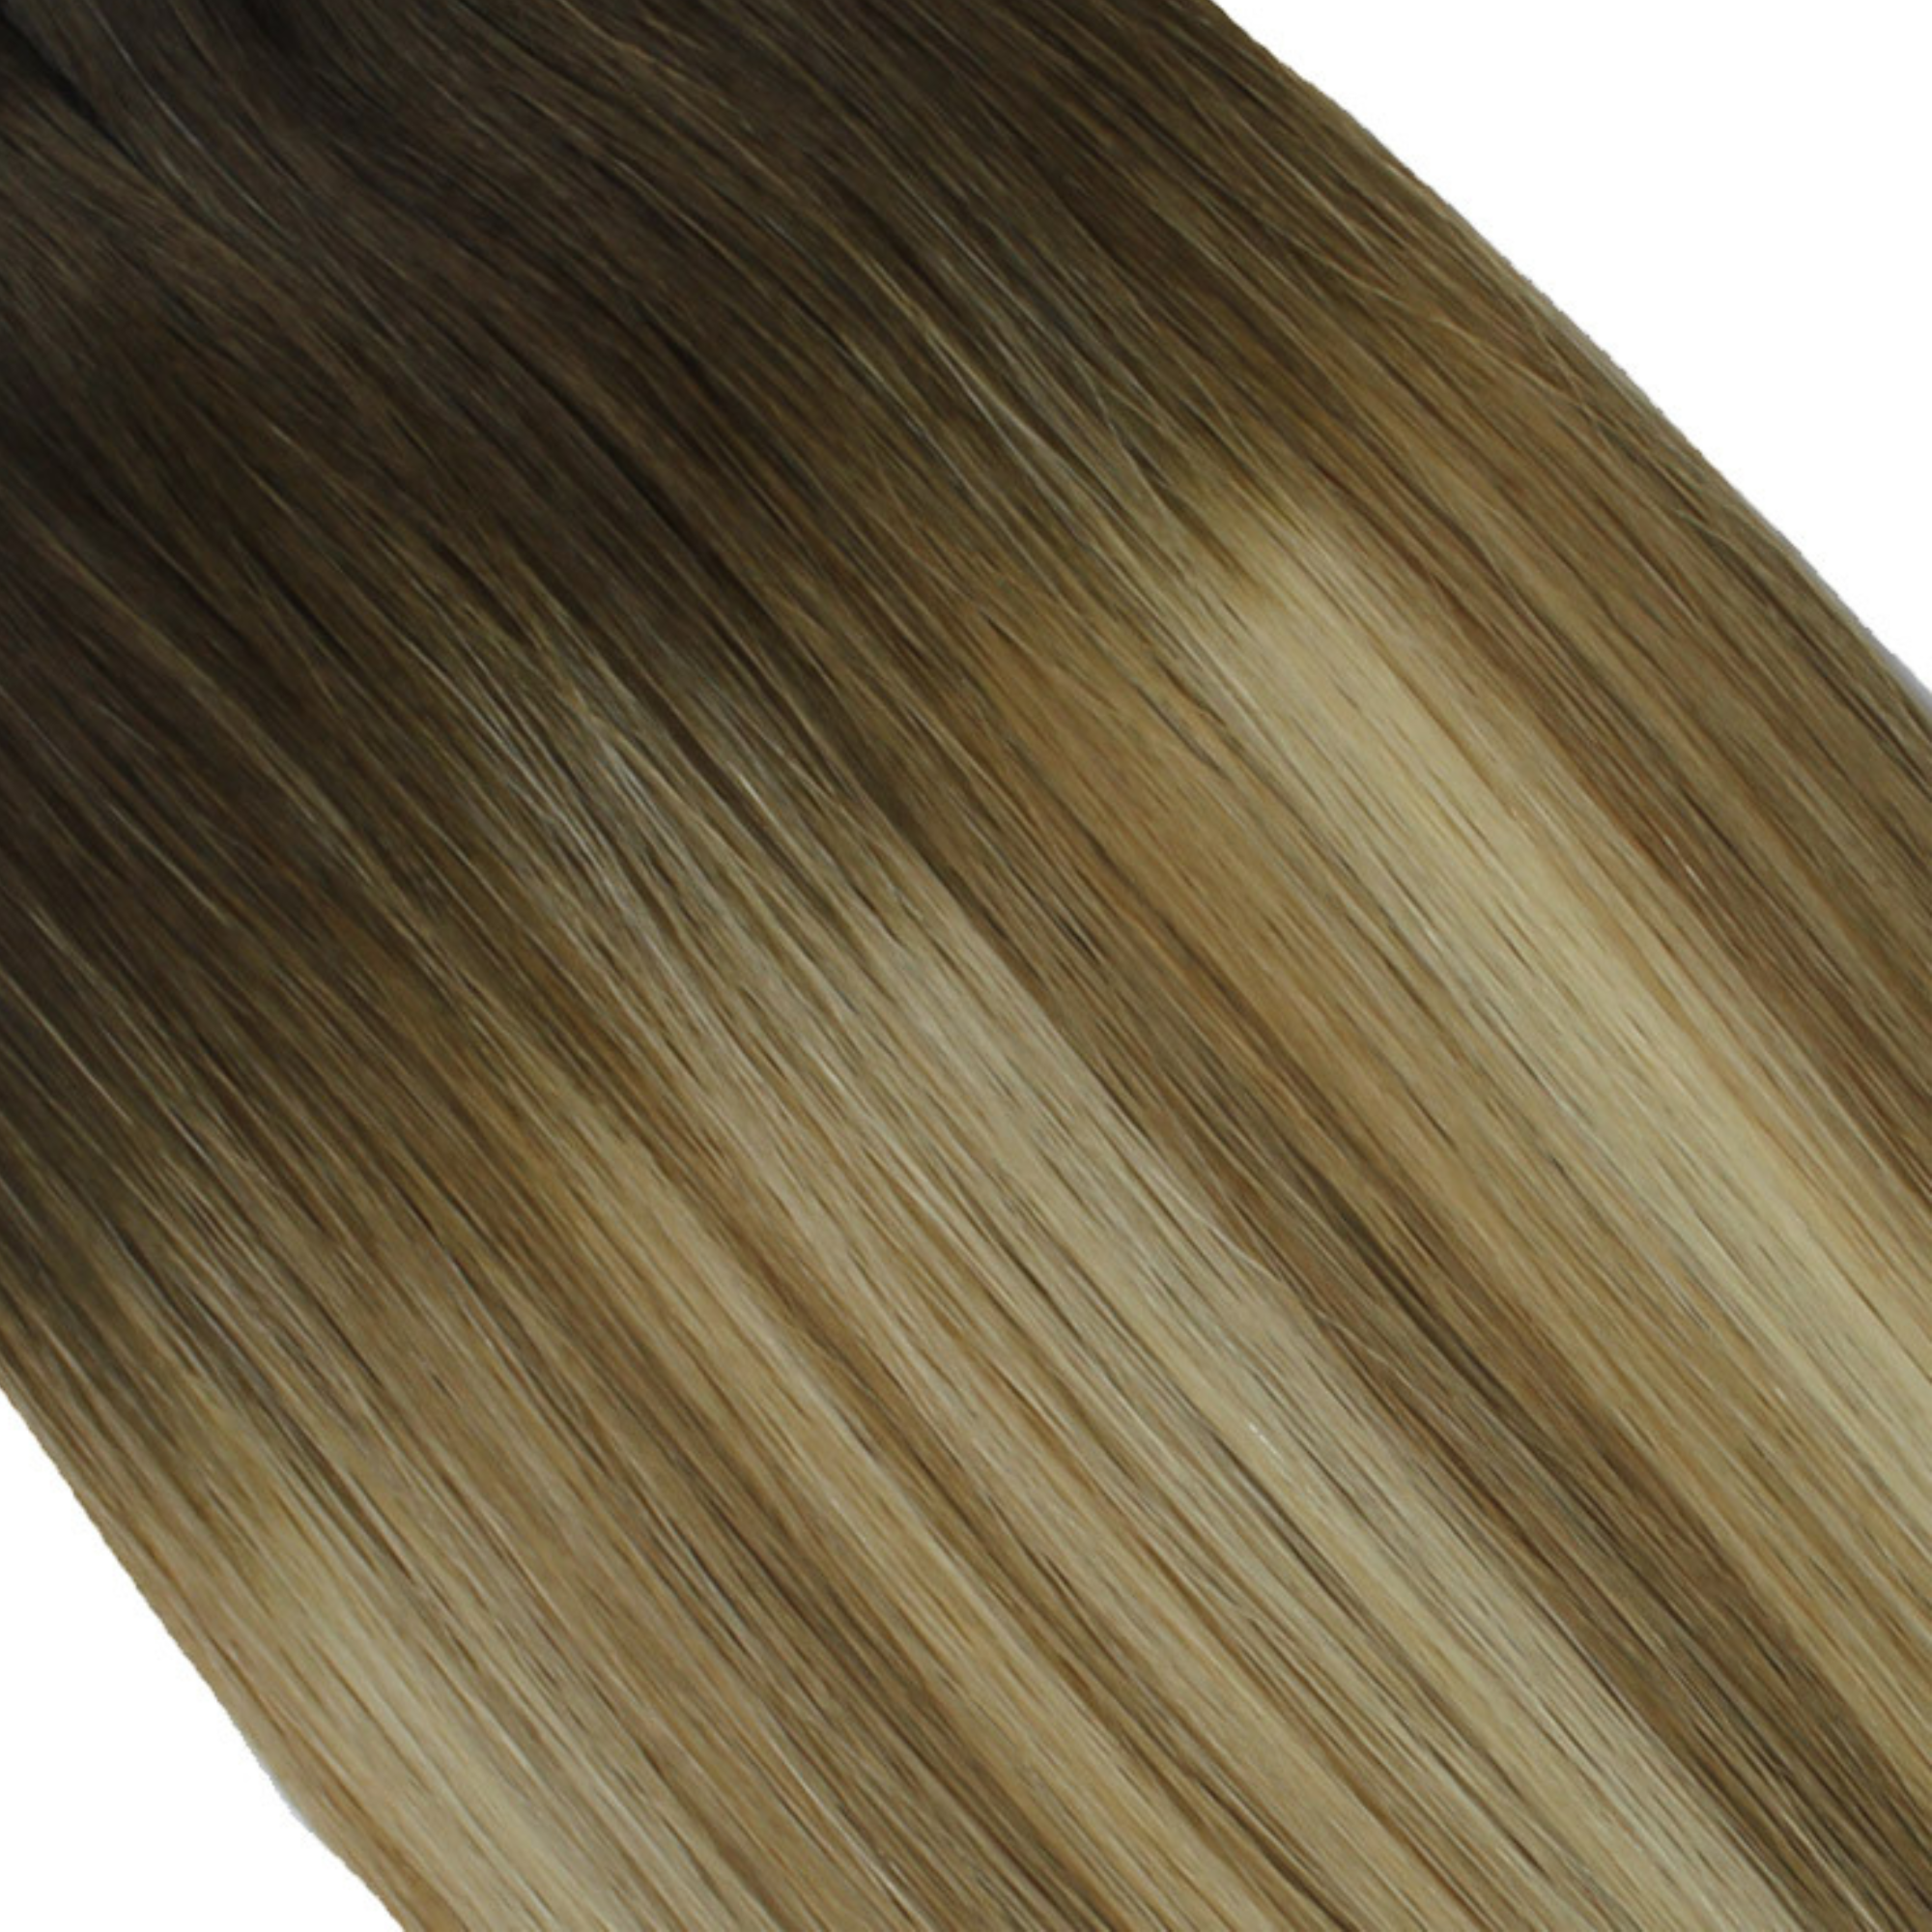 "hair rehab london 24" length 280 grams weight ultimate clip-in hair extensions shade titled rooted supermodel"